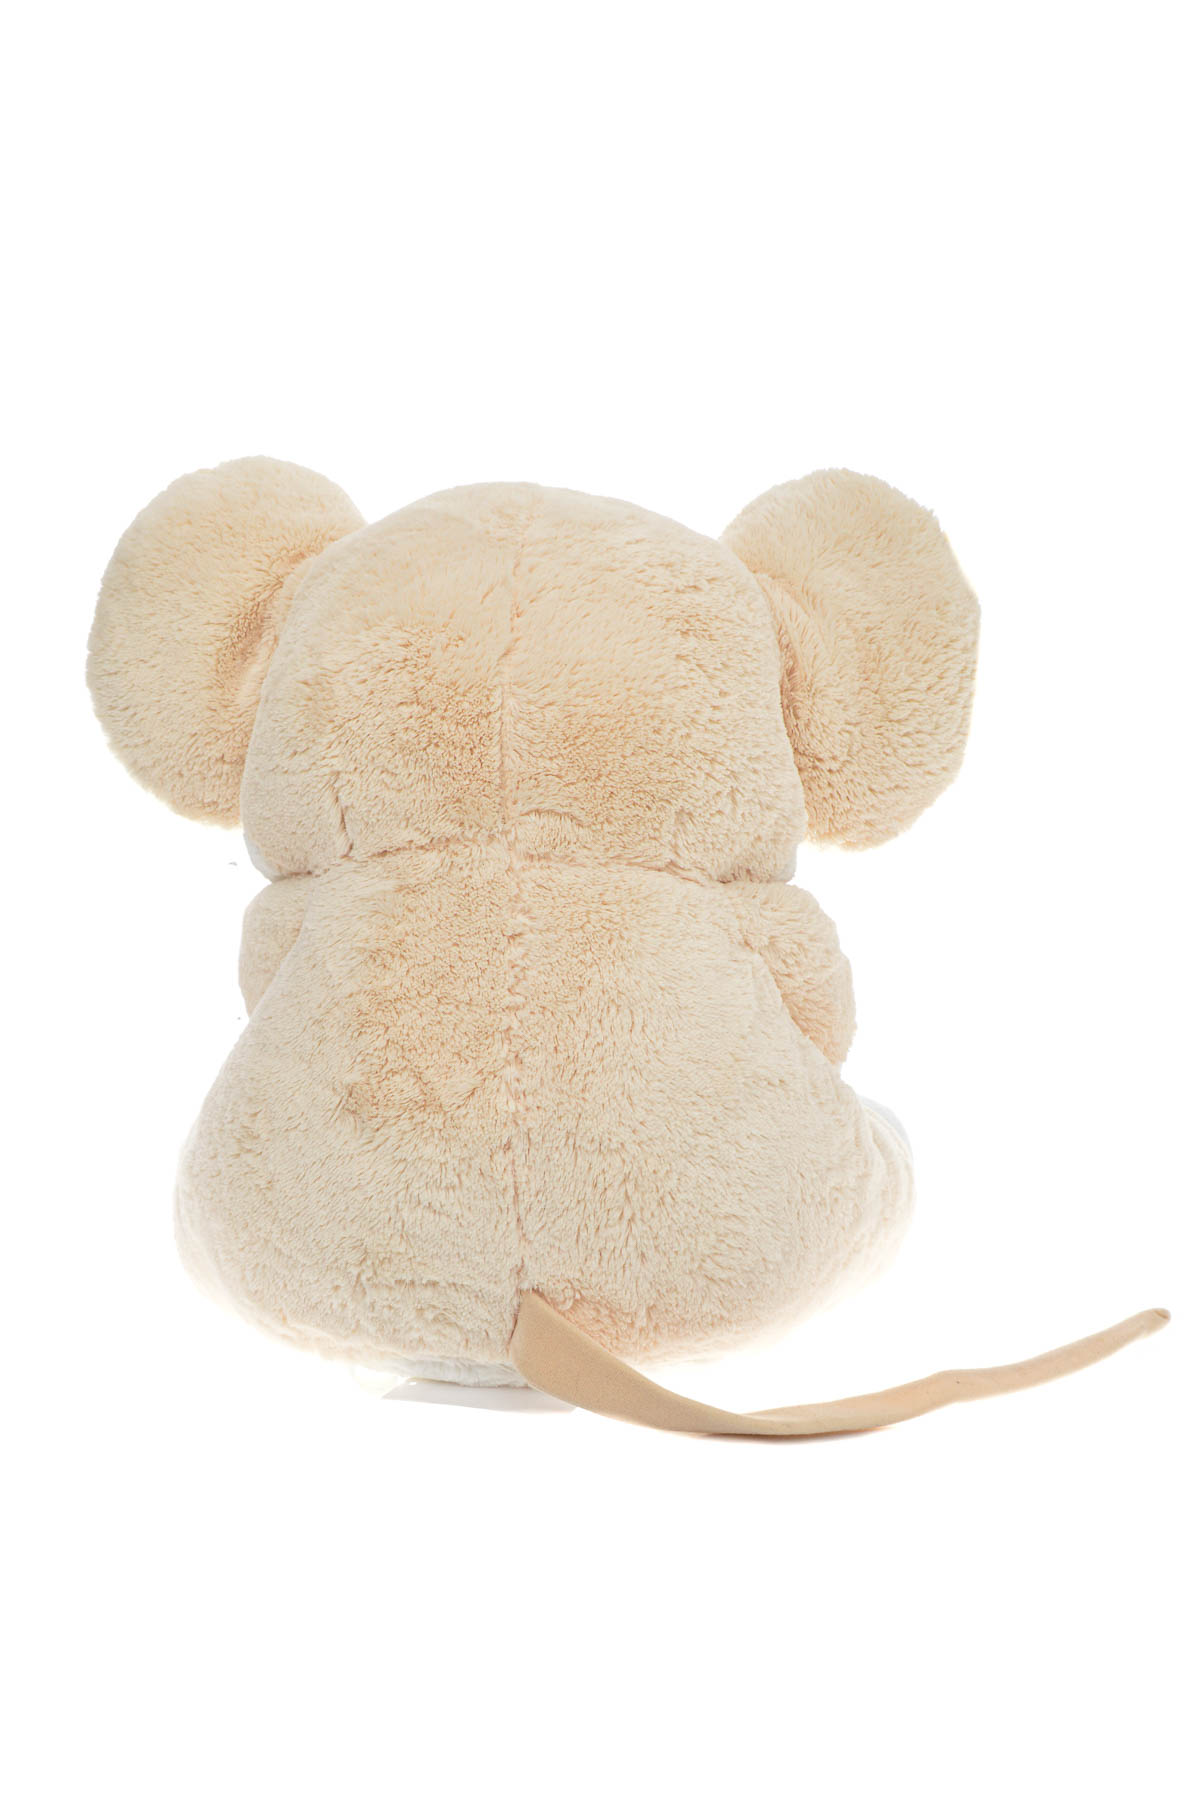 Stuffed toys - Mouse - 2